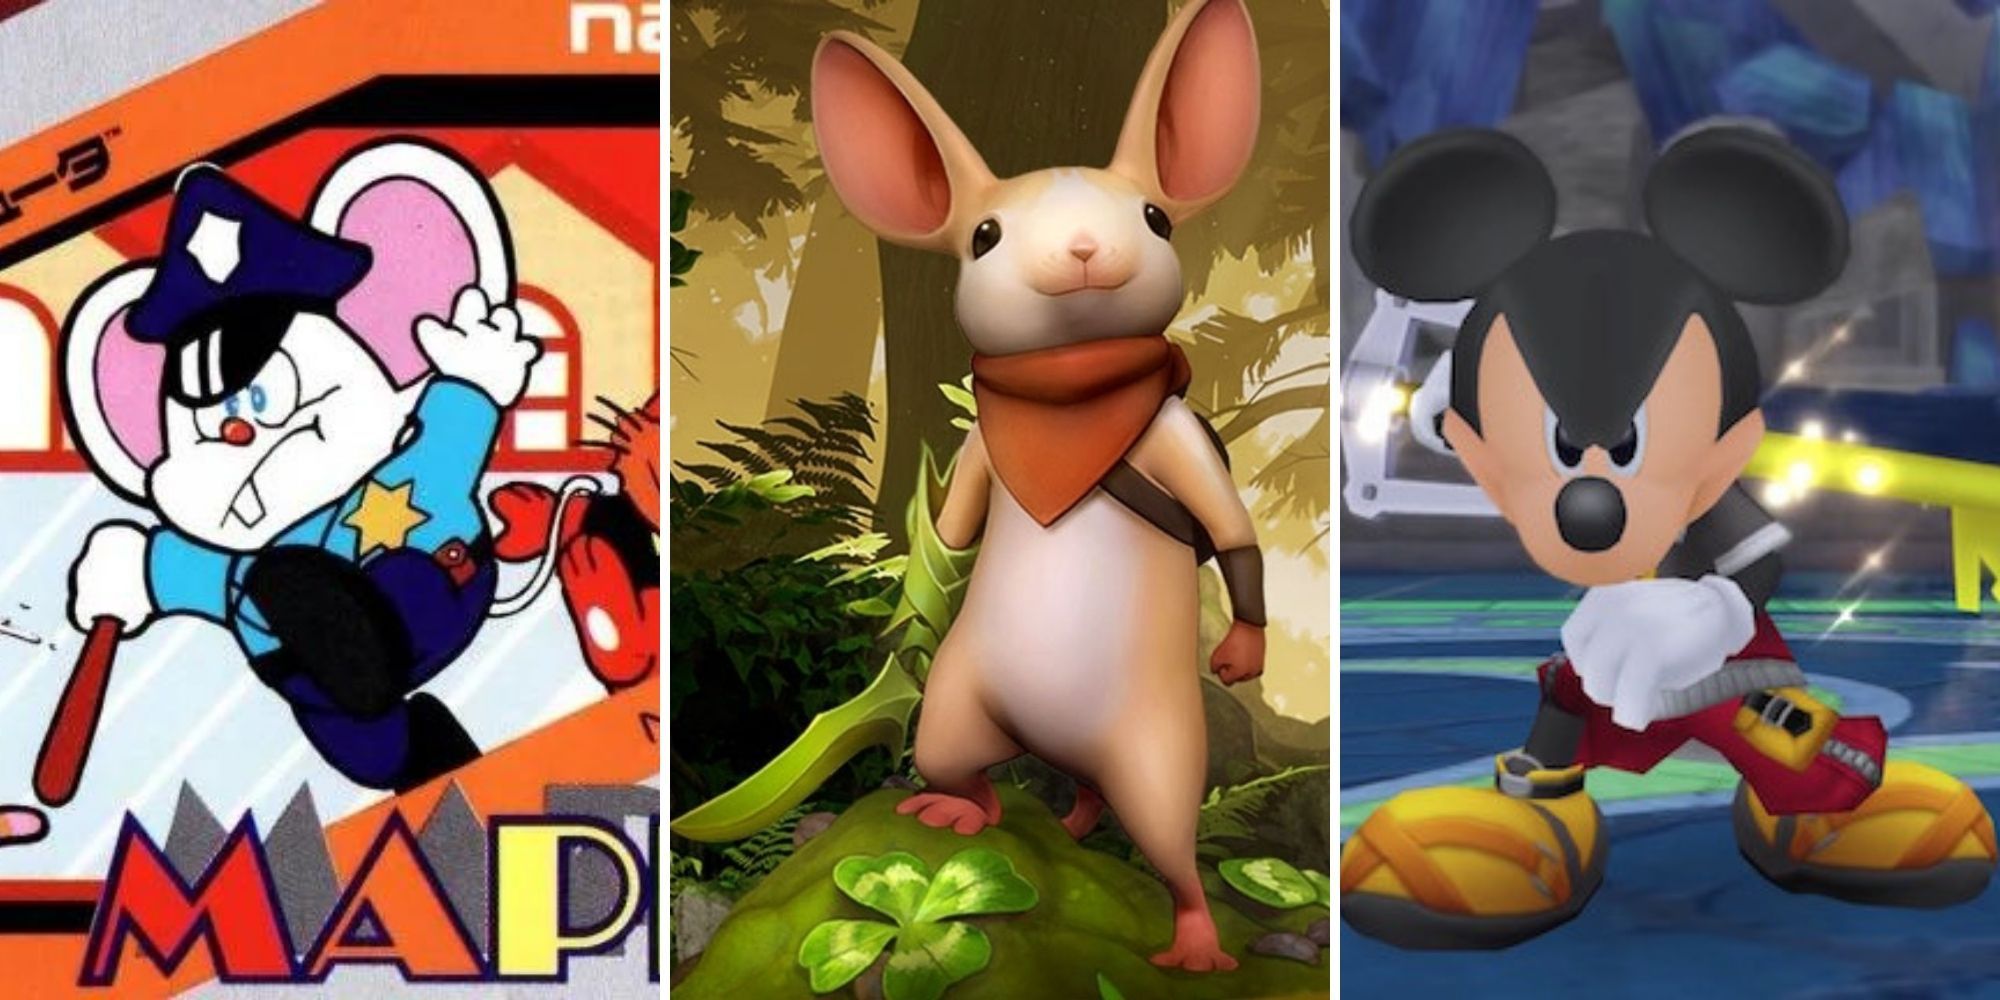 Mappy Jumps Out Of The Way, Quill Stands With Sword In Hand, Mickey Prepares To Attack With His Keyblade